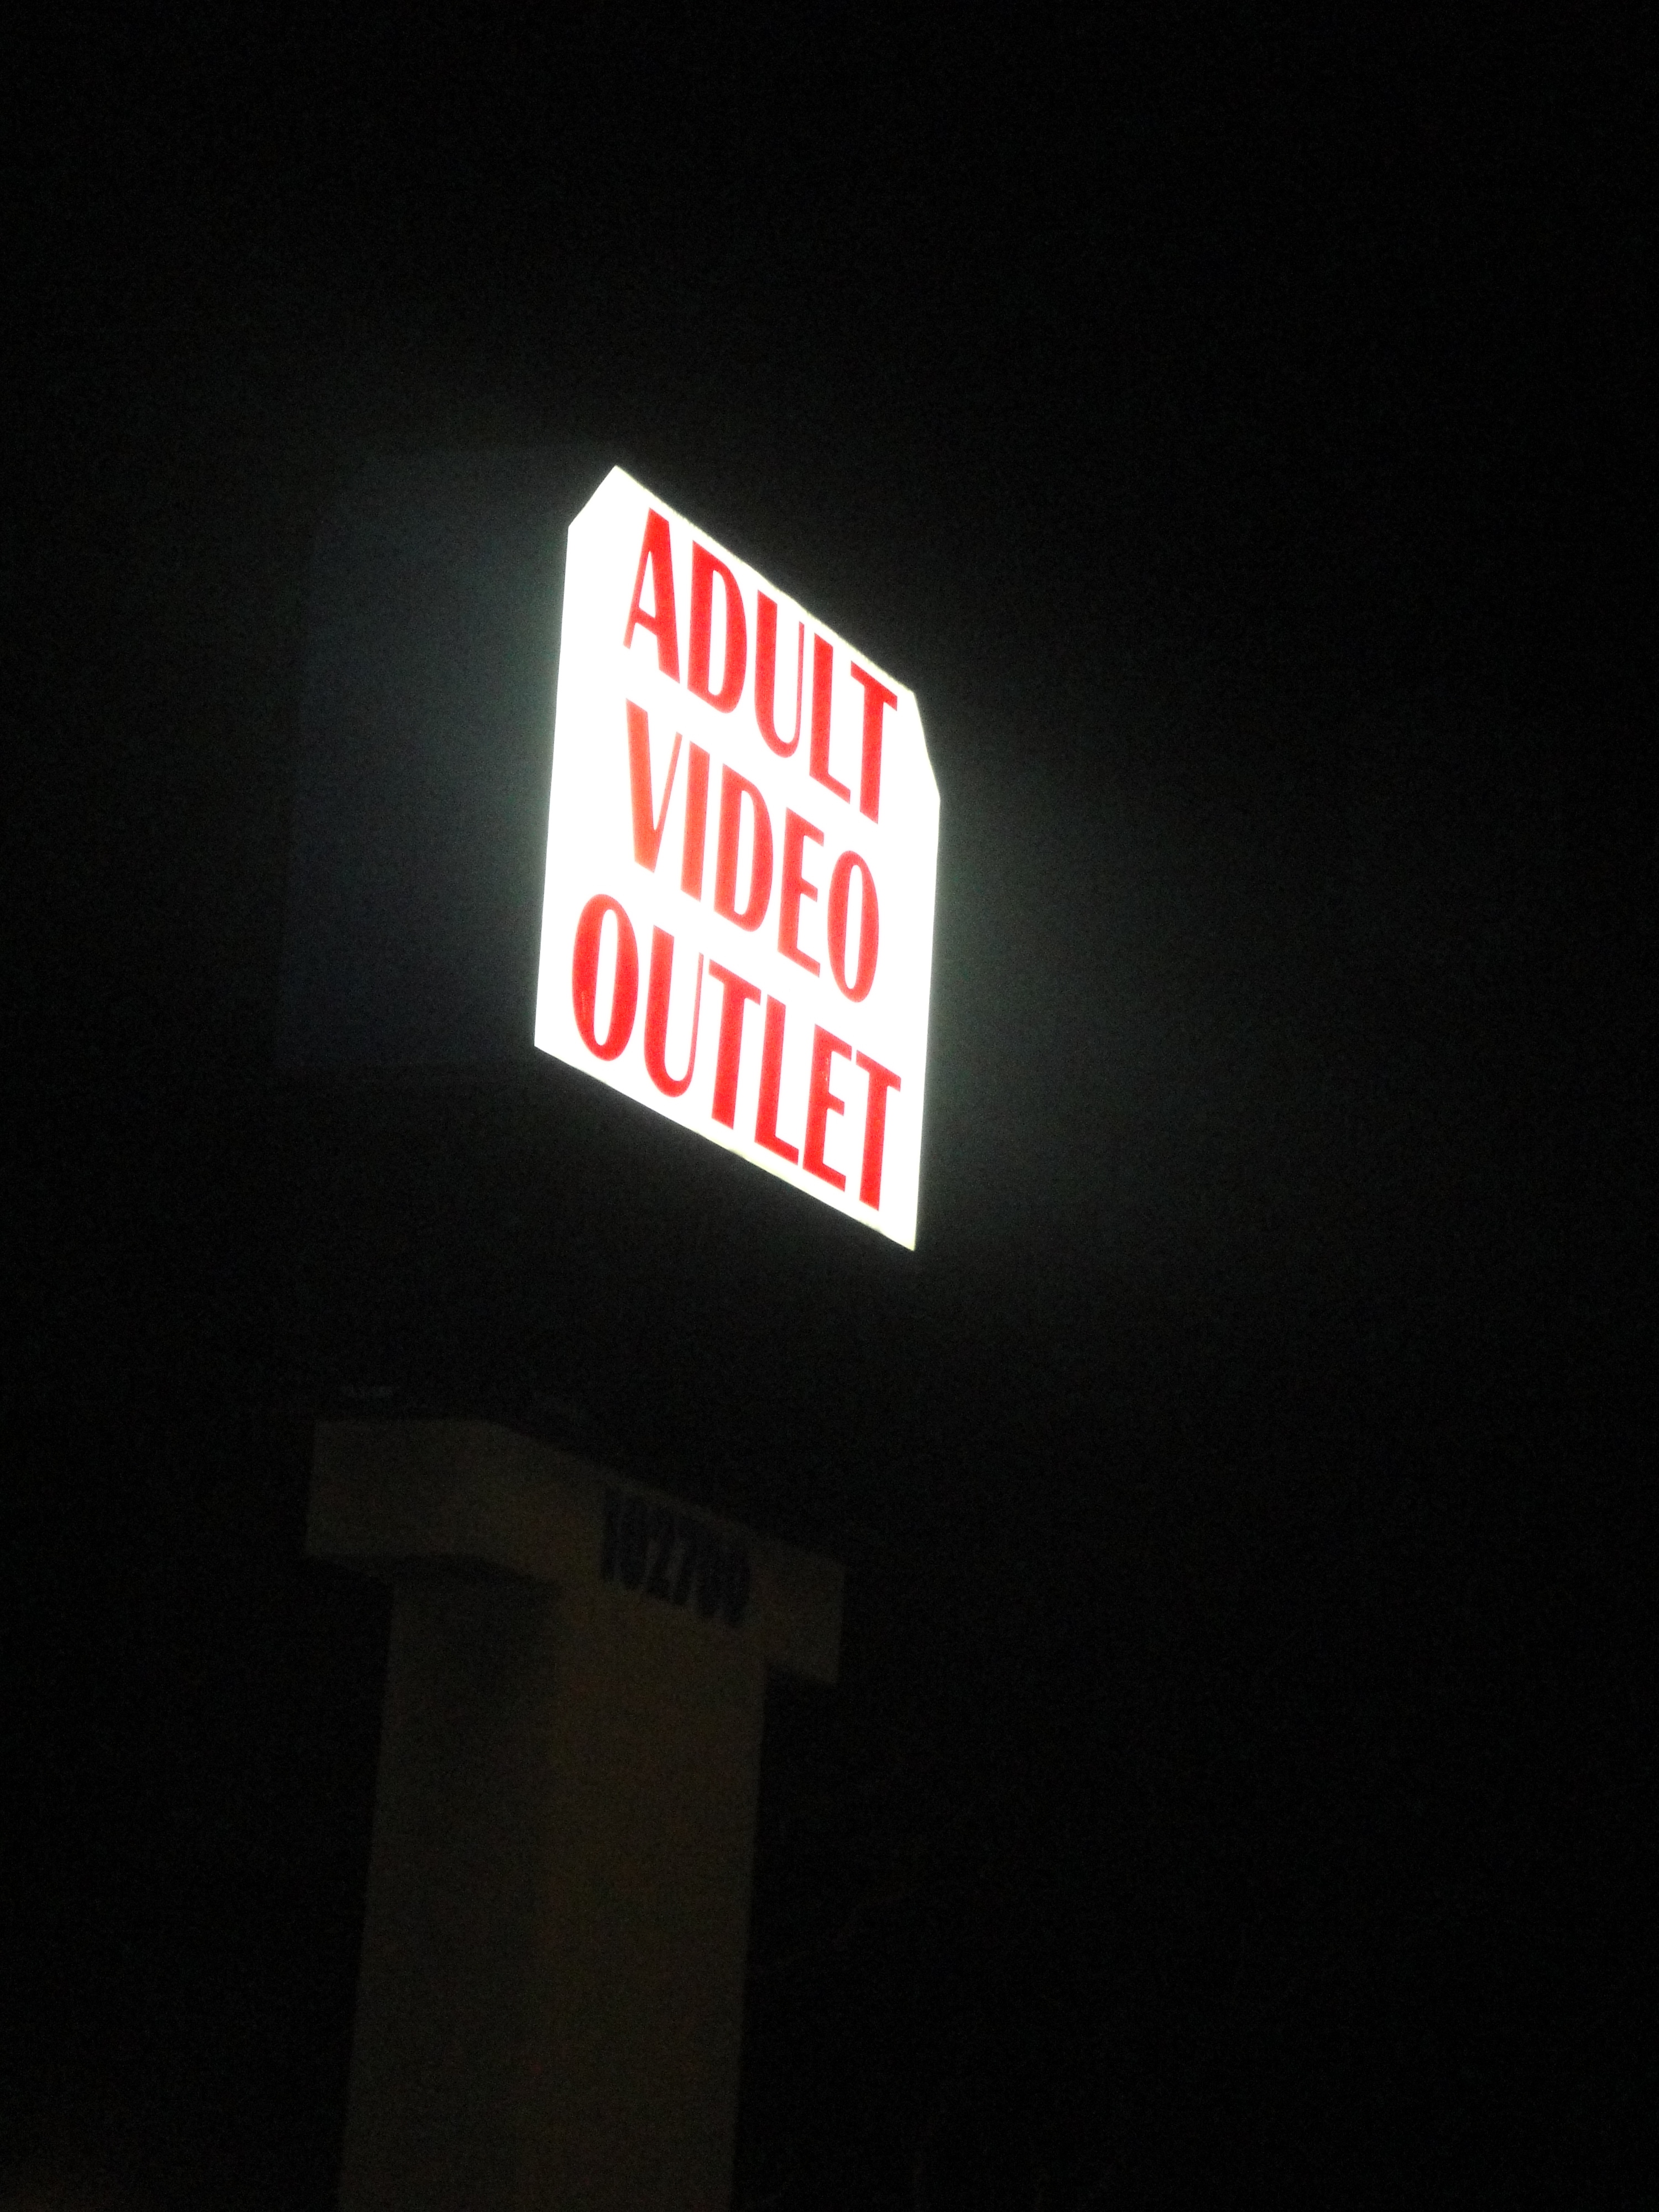 Adult Video Outlet 79